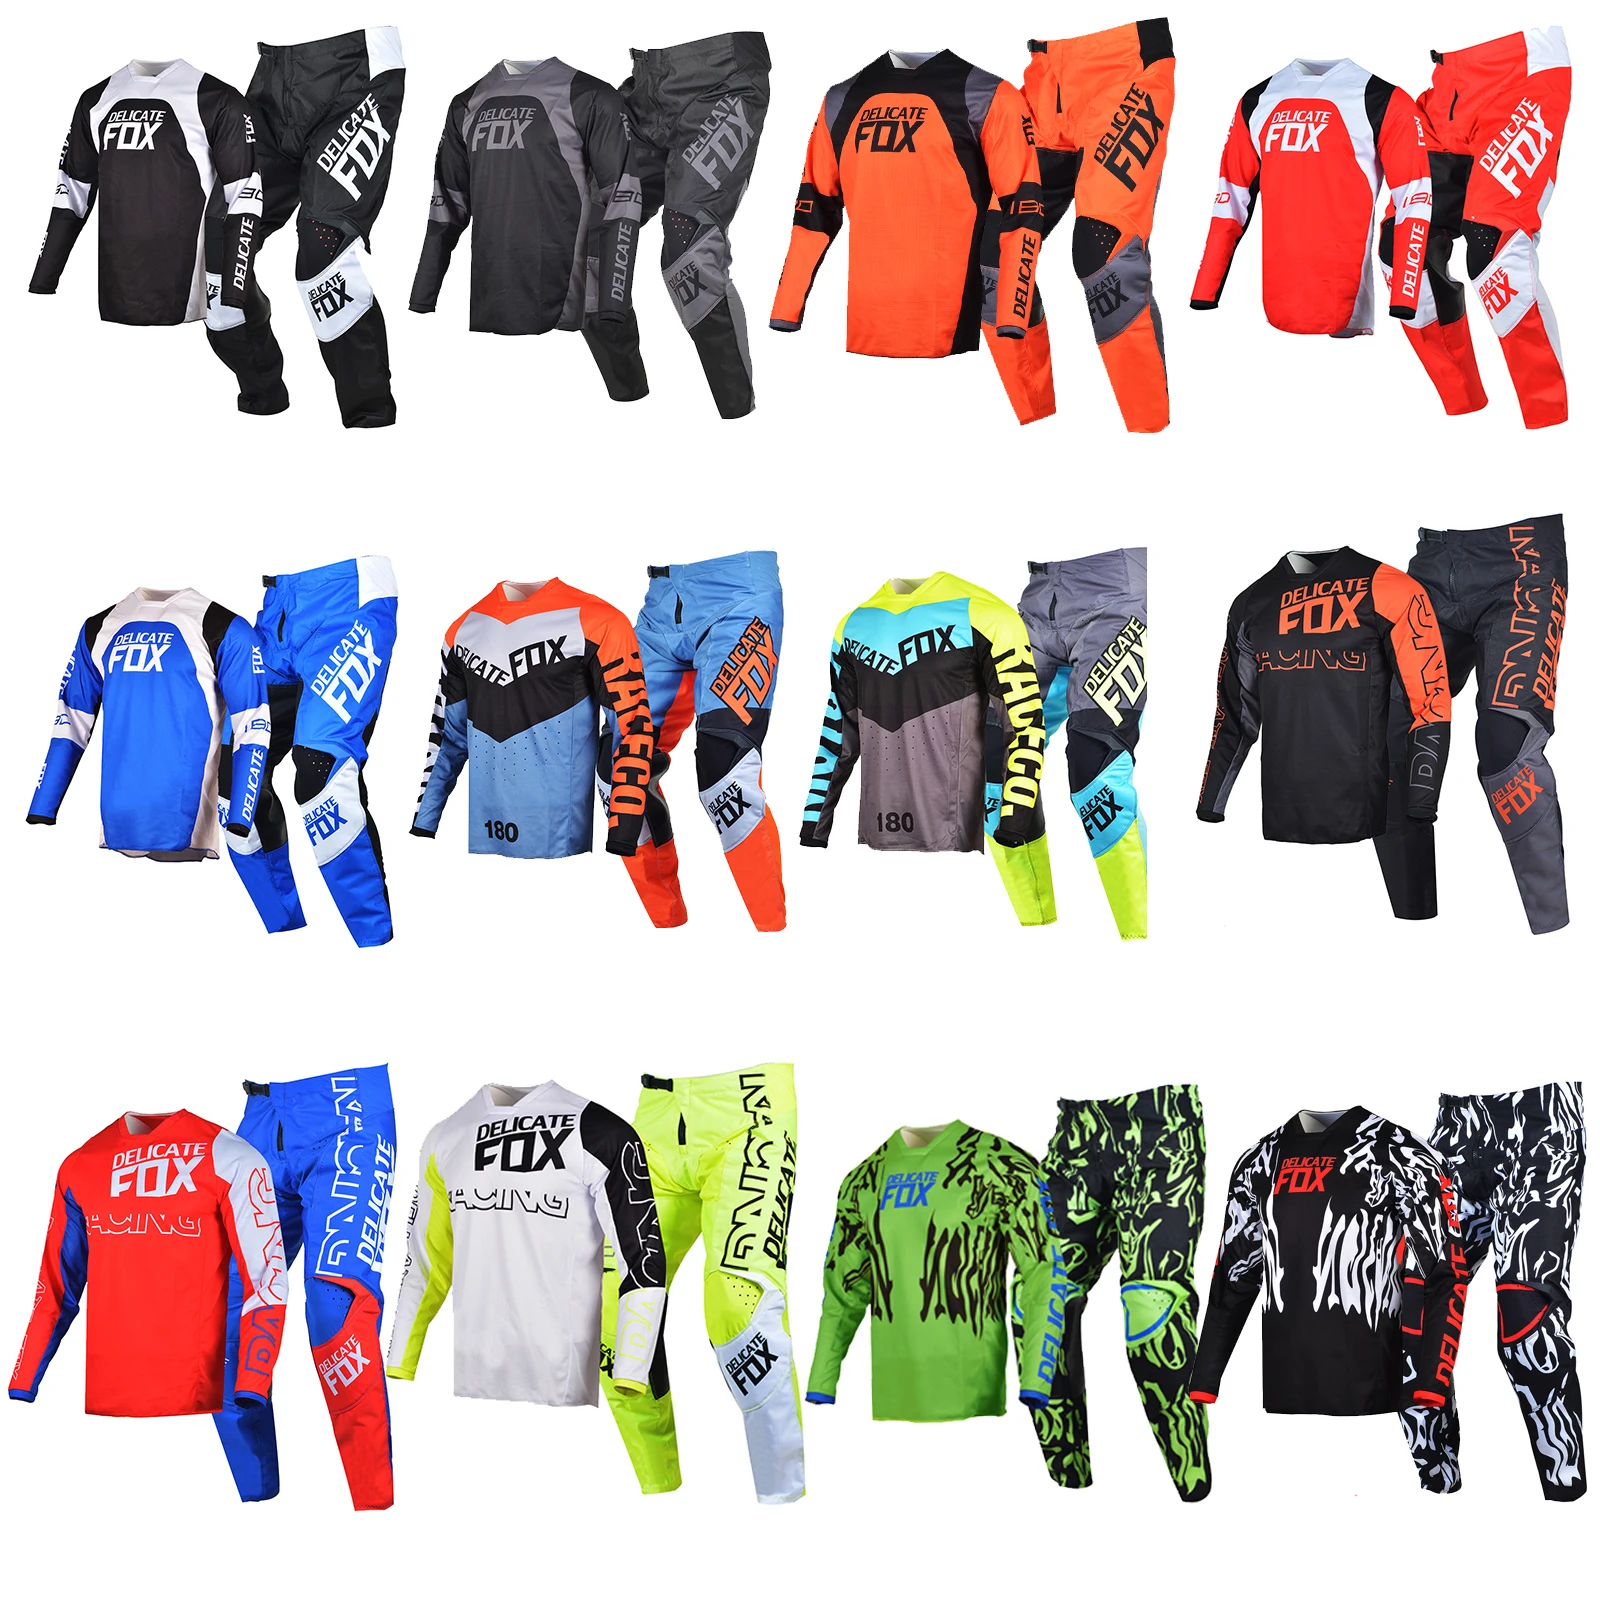 180 Gear Set Motocross Jersey Pants MX Combo ATV Outfit BMX DH Dirt Bike Men Off-road Moto Suits Cycling Bicycle Motorcycle Kits